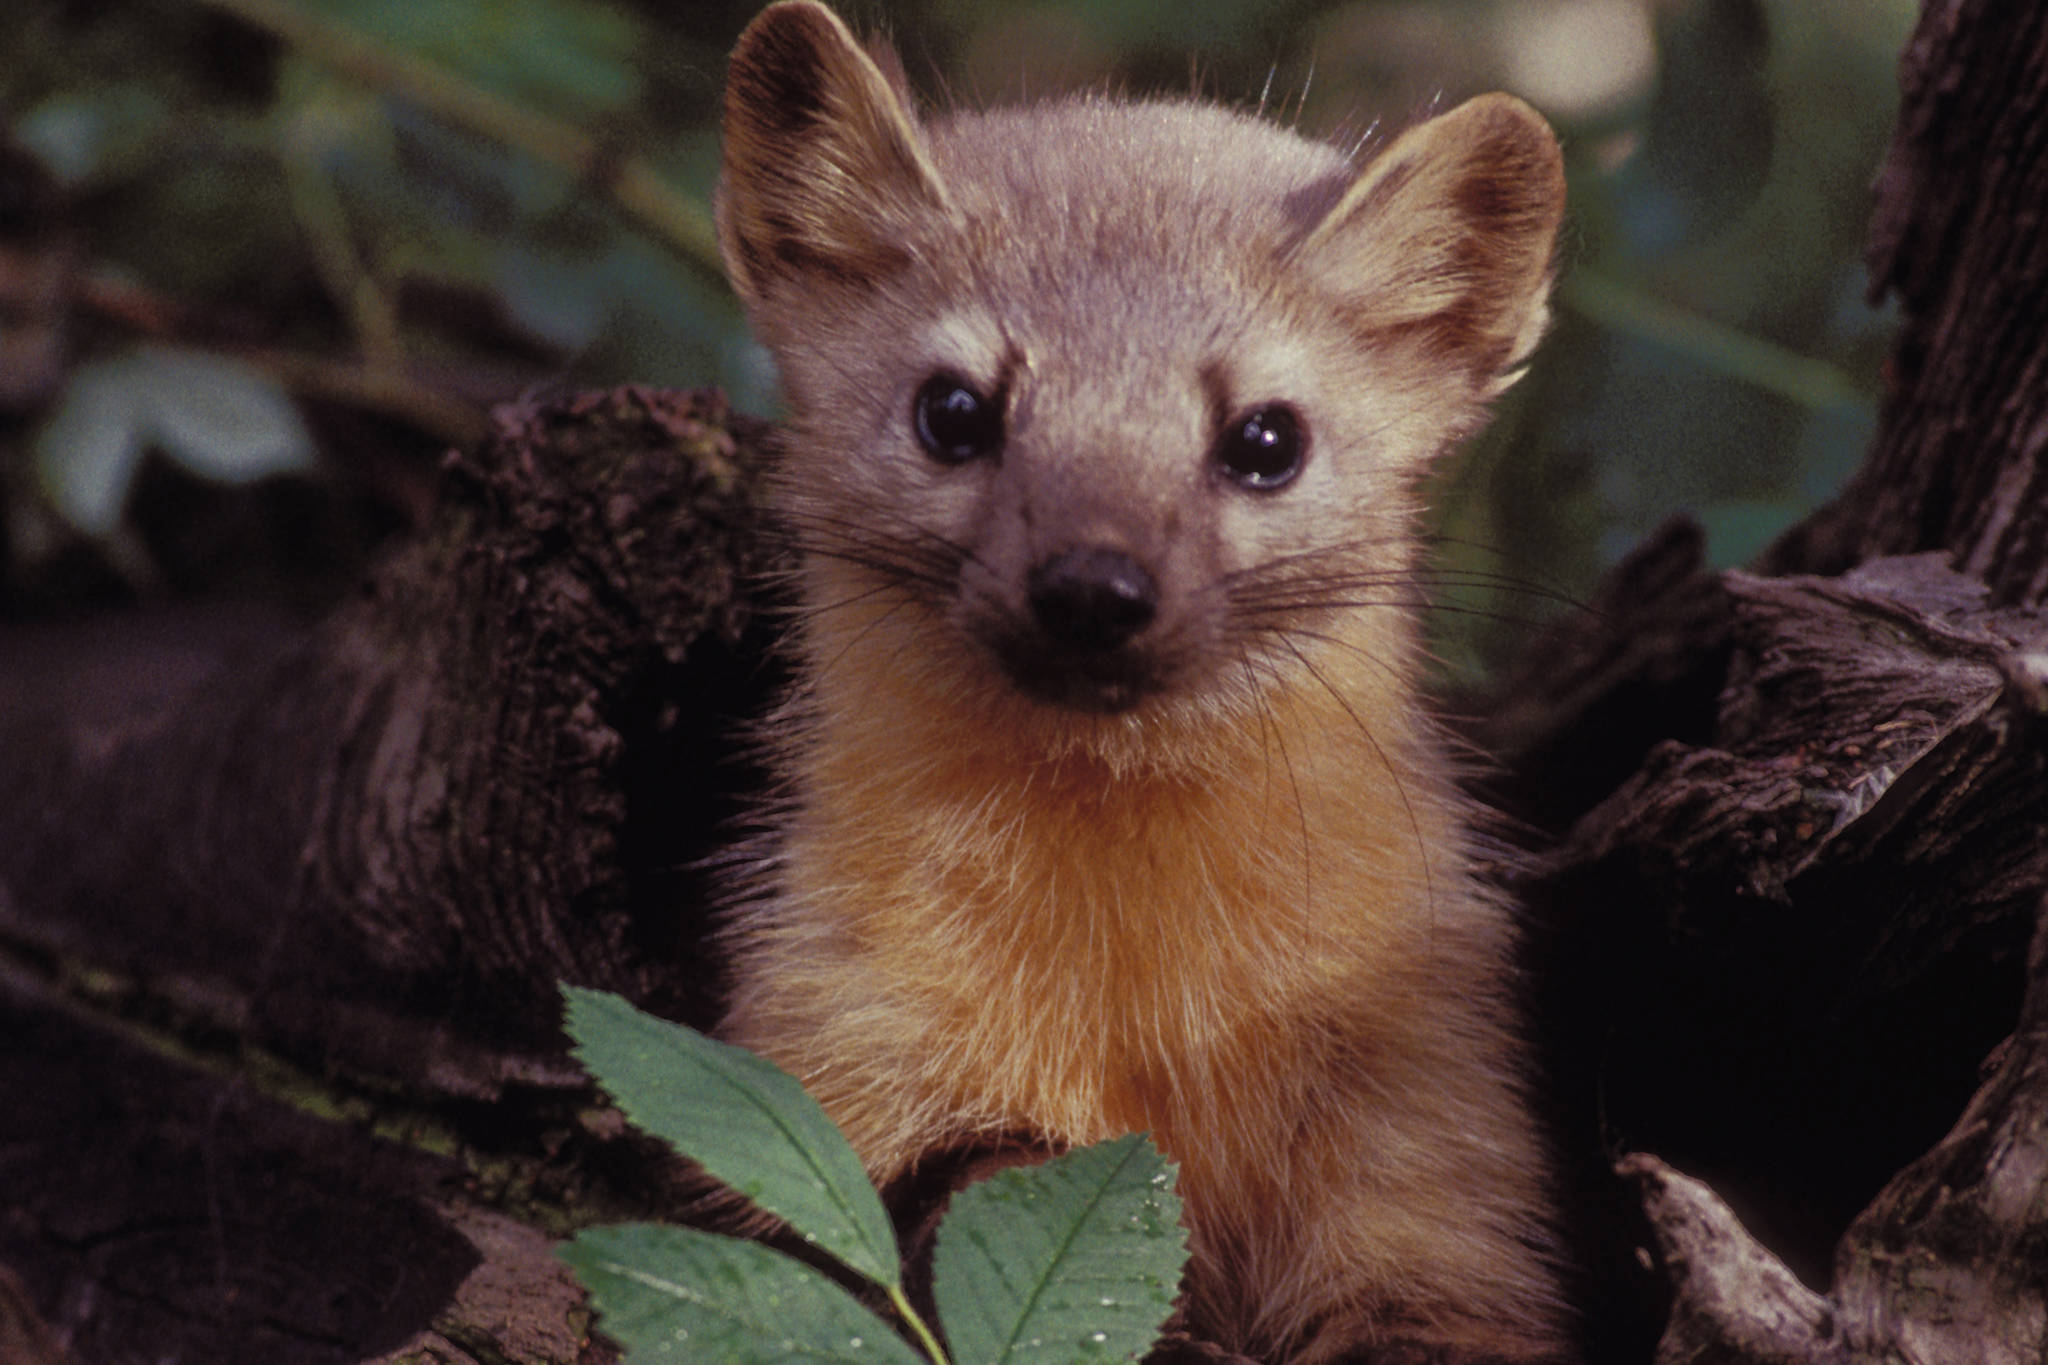 Marten, similar to the one in this photo, are one of nine species of weasel native to Alaska. Marten and fisher are particularly associated with forests. (Courtesy Photo | U.S. Fish and Wildlife Service)